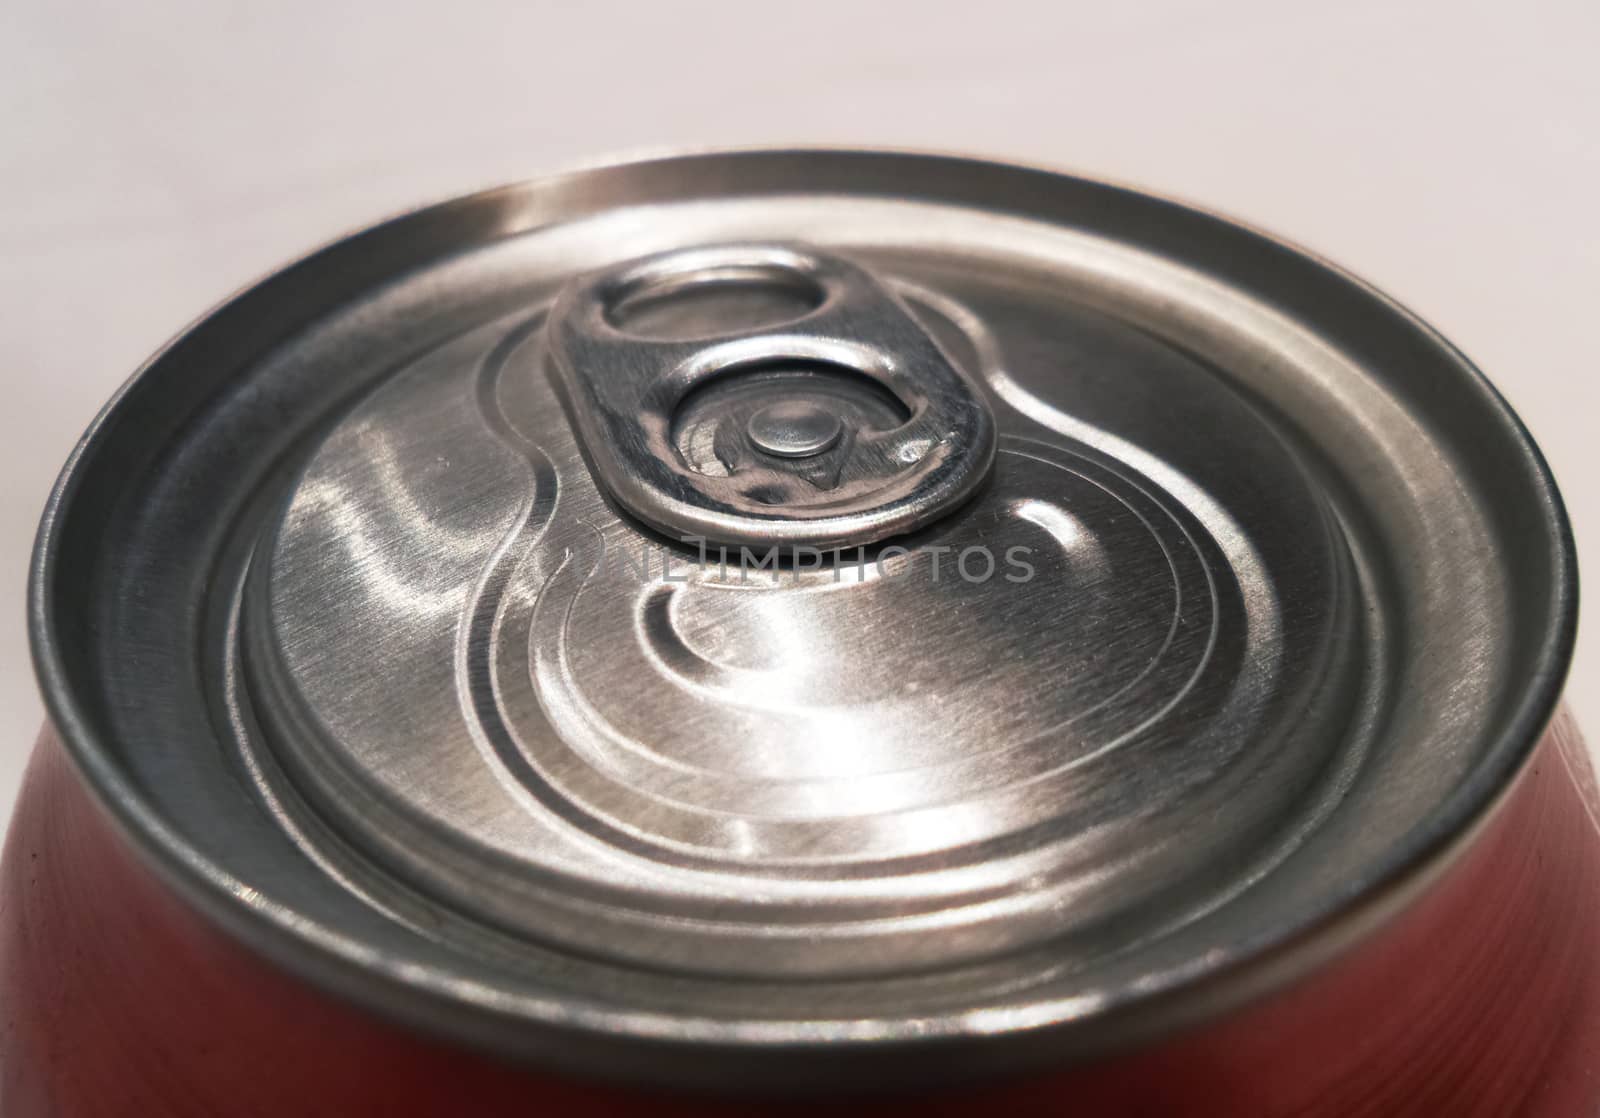 a close up of a soda can lid showing shallow depth of field